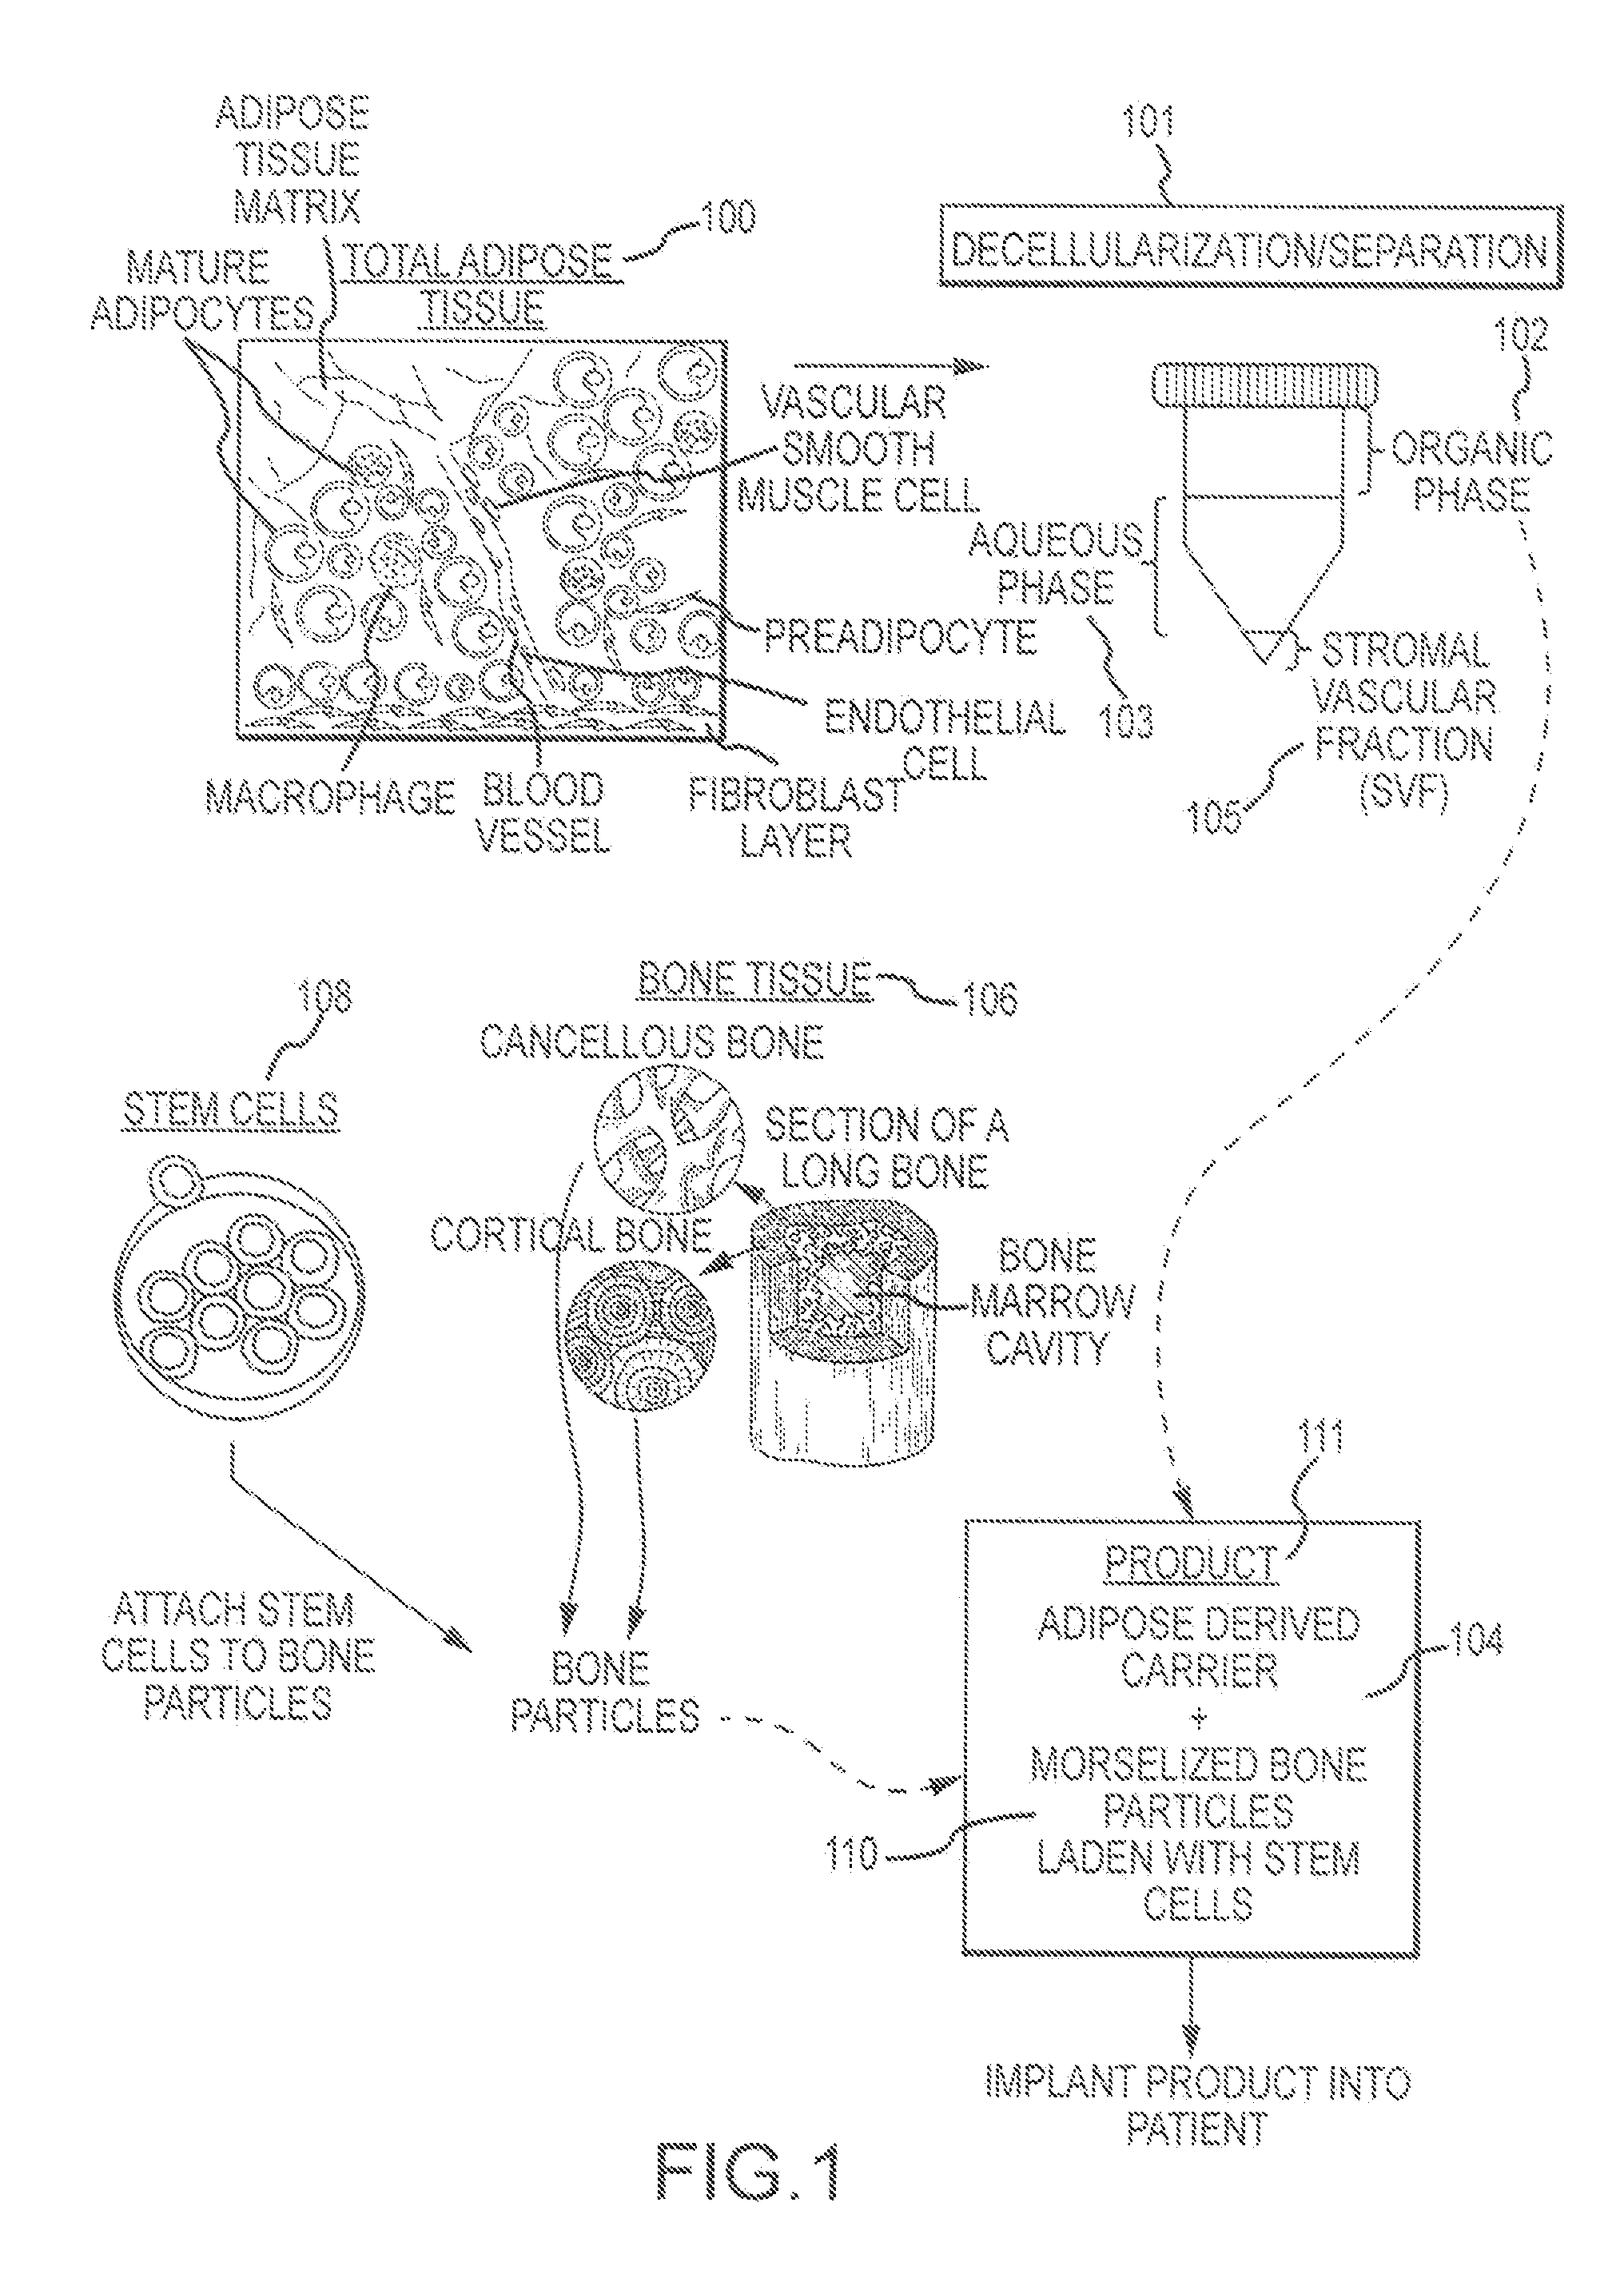 Adipose composition systems and methods